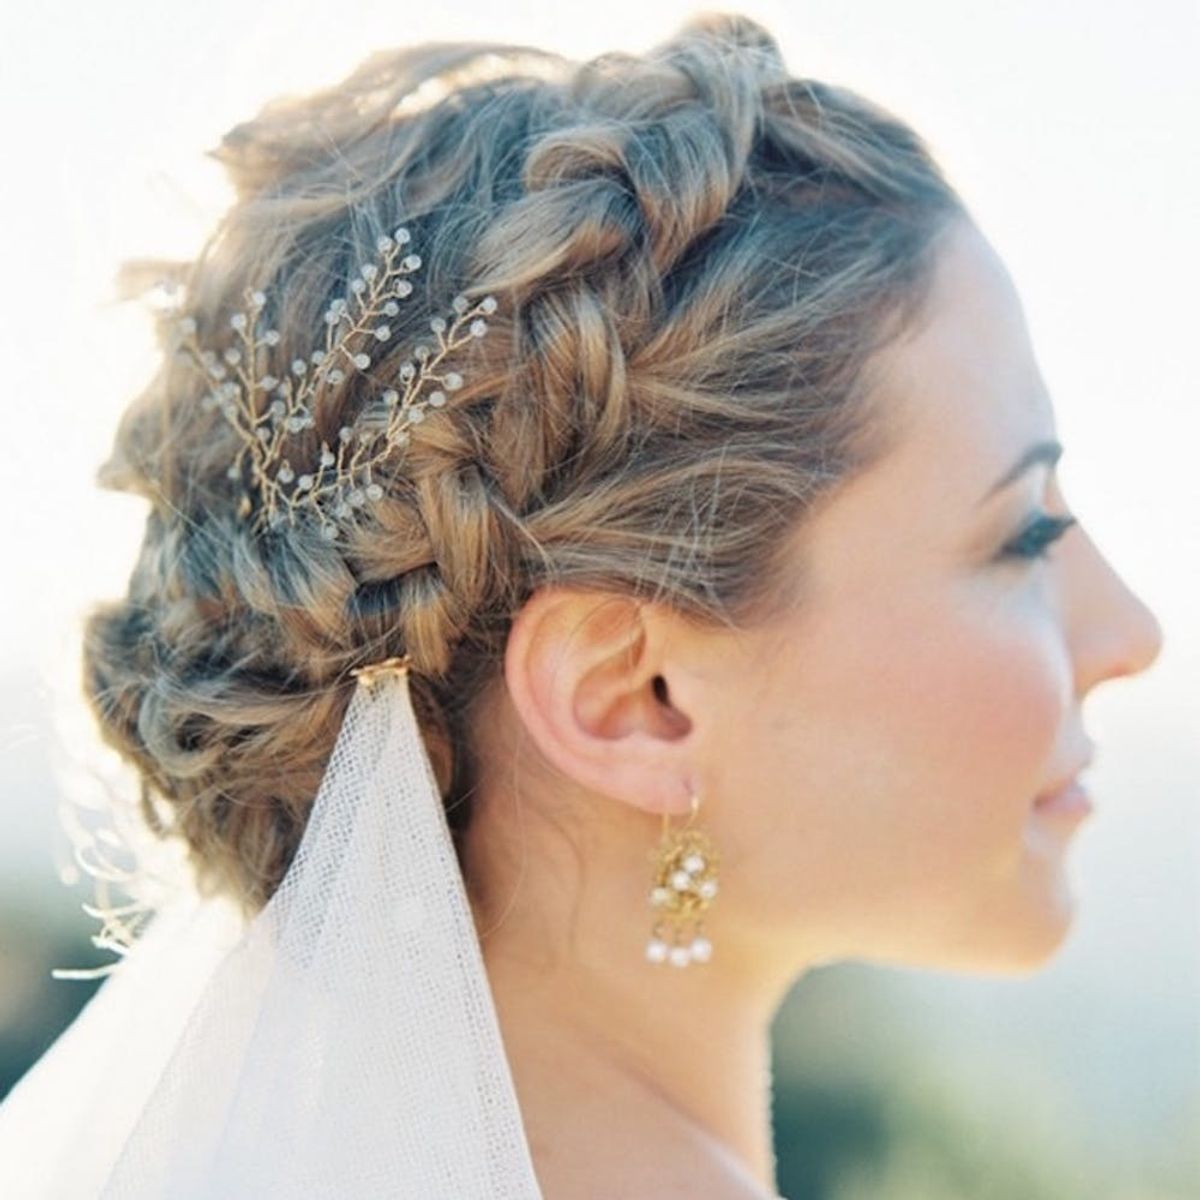 7 Ways to Style Your Hair Under a Wedding Veil